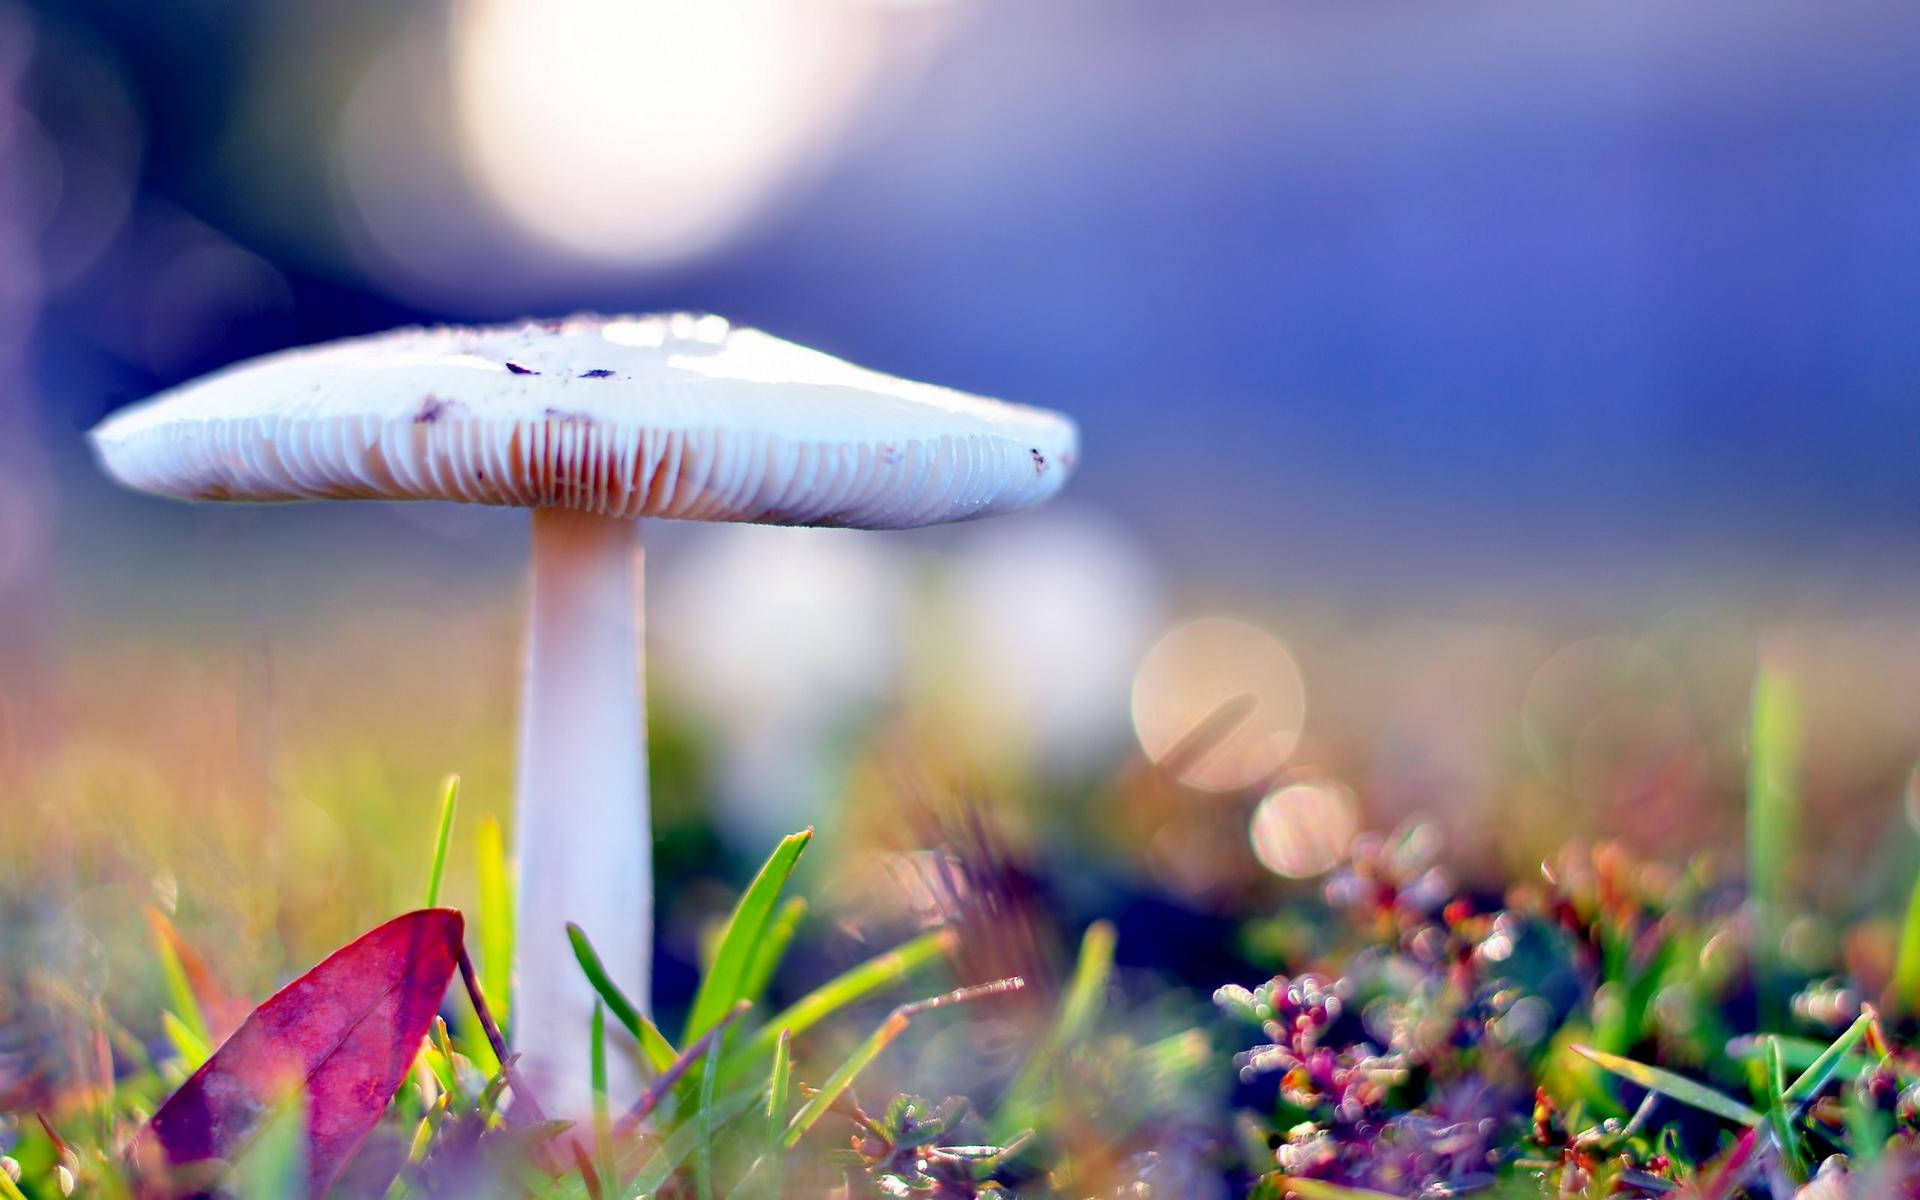 Enchanting Woodland Scenery With Colorful Mushrooms